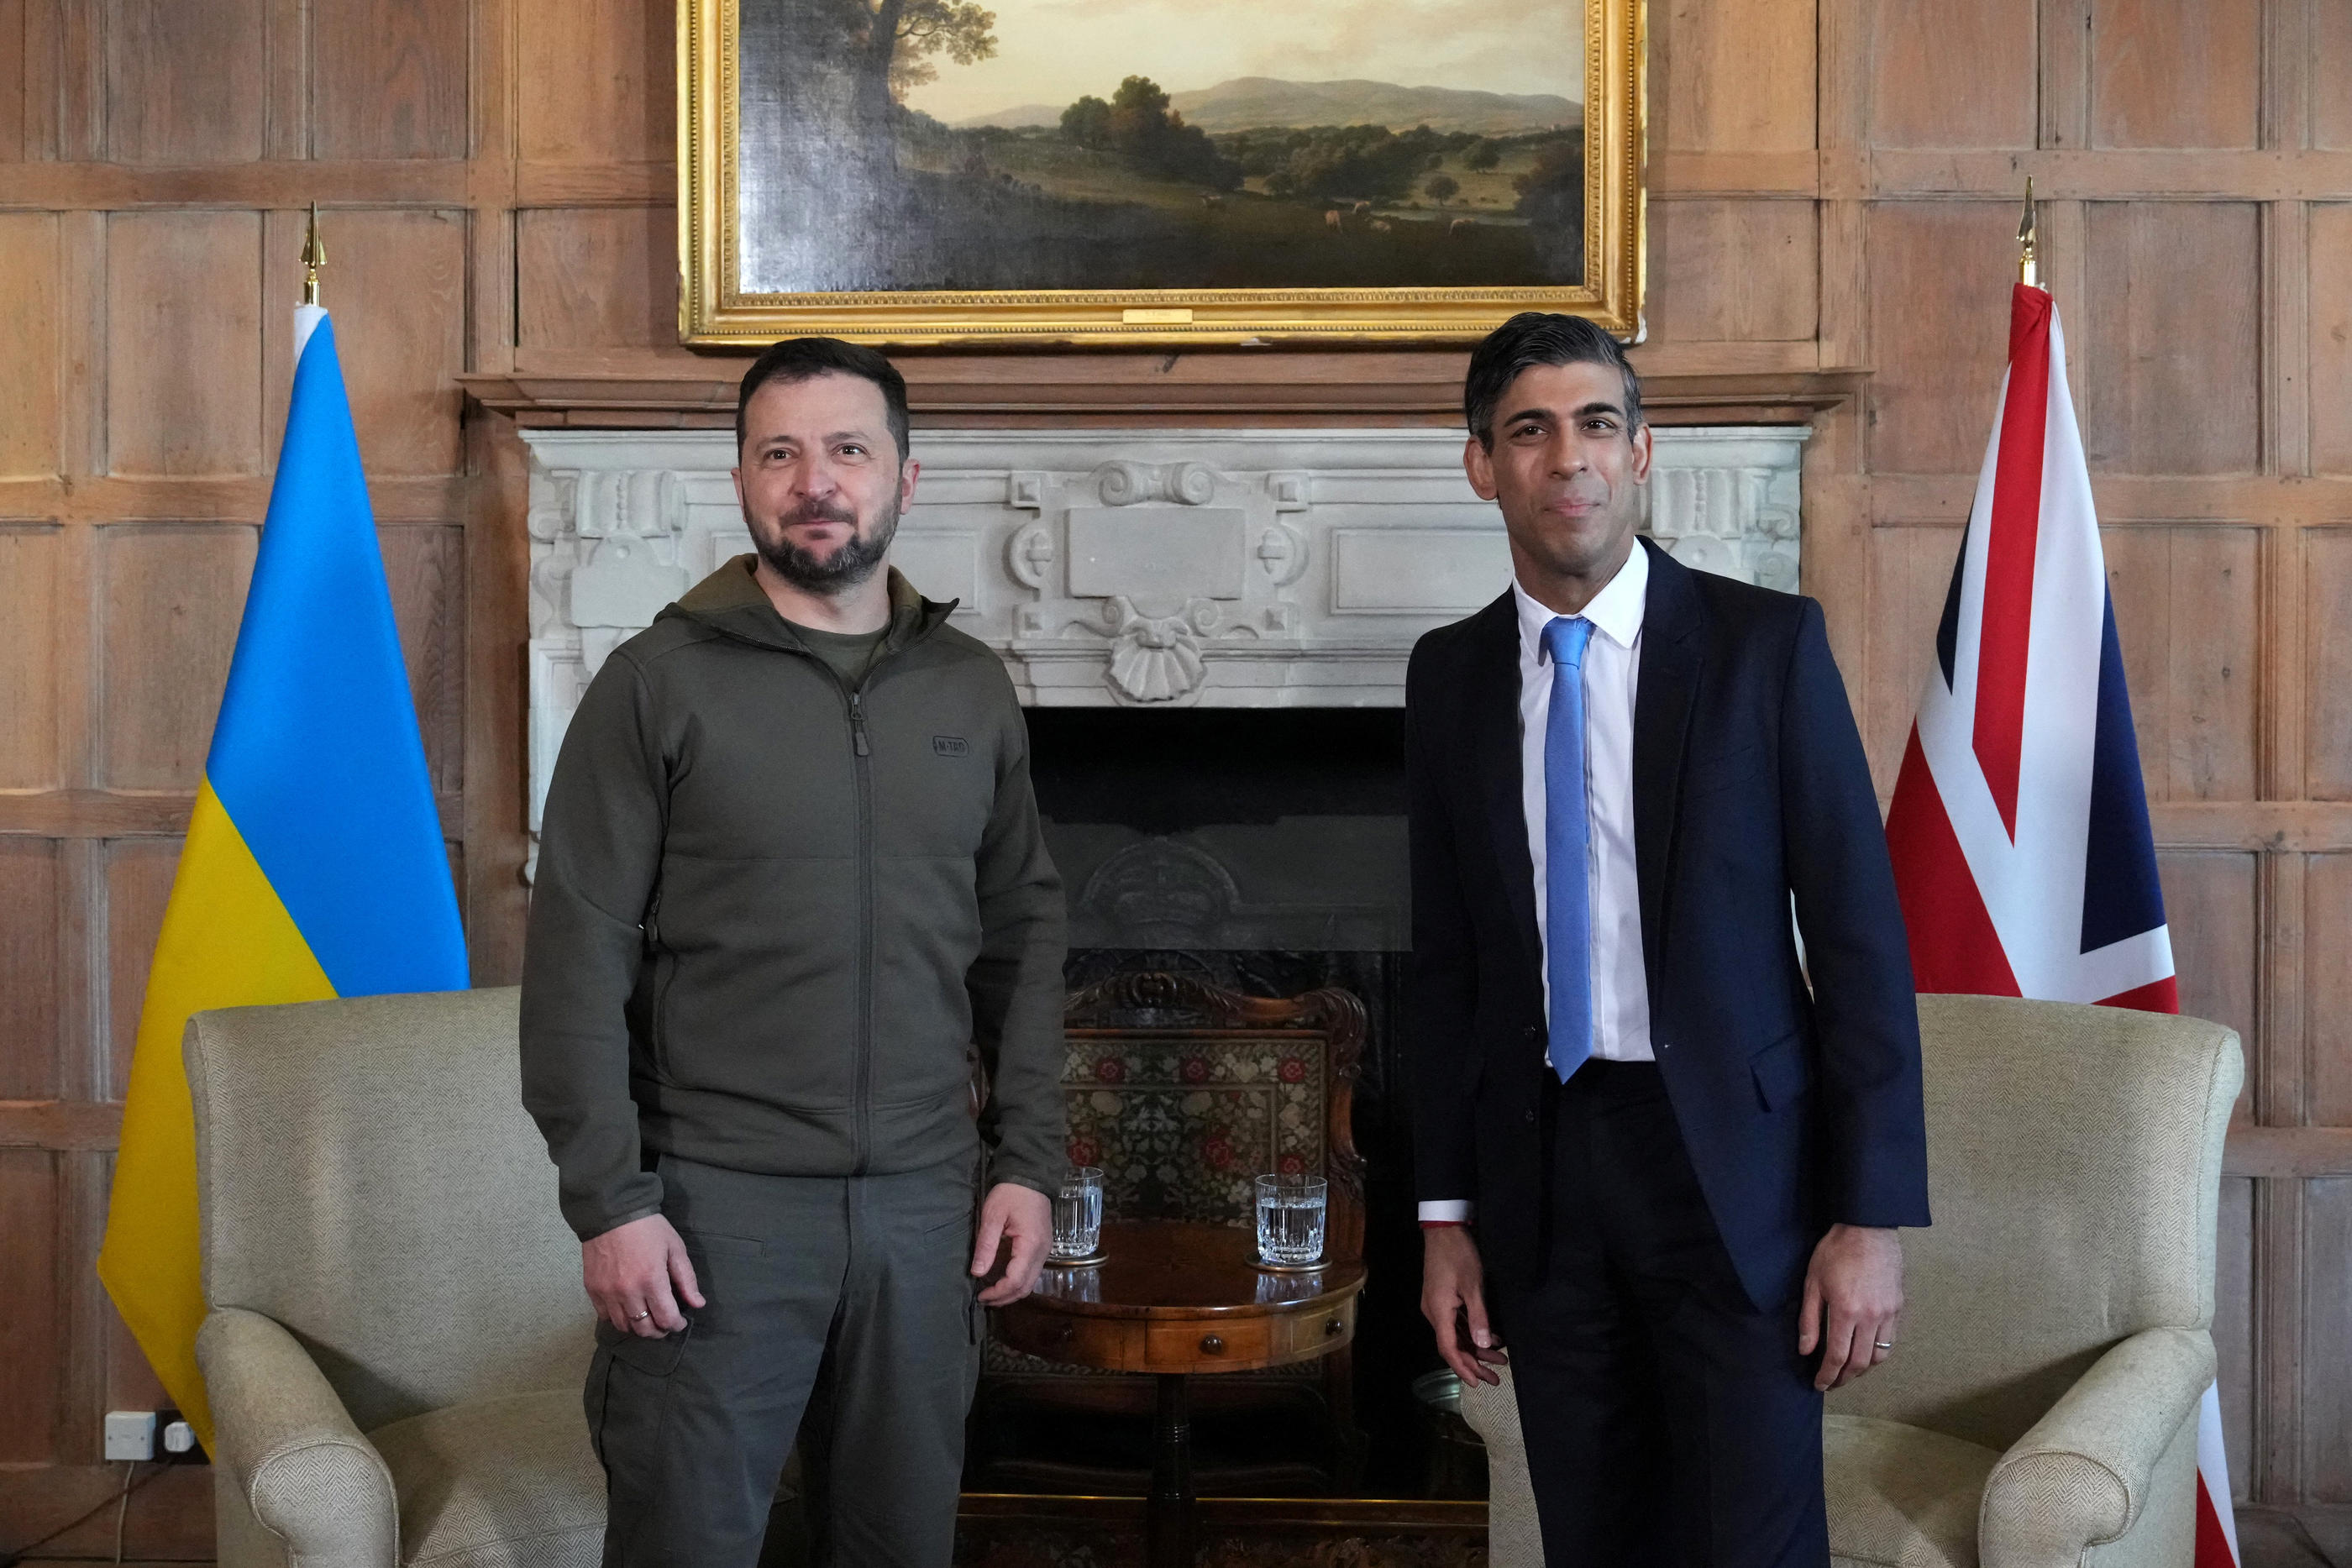 AYLESBURY, ENGLAND - MAY 15: Britain's Prime Minister, Rishi Sunak talks with Ukraine's President, Volodymyr Zelenskyy, ahead of a bilateral meeting at Chequers on May 15, 2023 in Aylesbury, England. In recent days, Mr Zelensky has travelled to meet Western leaders seeking support for Ukraine in the war against Russia. Carl Court/Pool via REUTERS